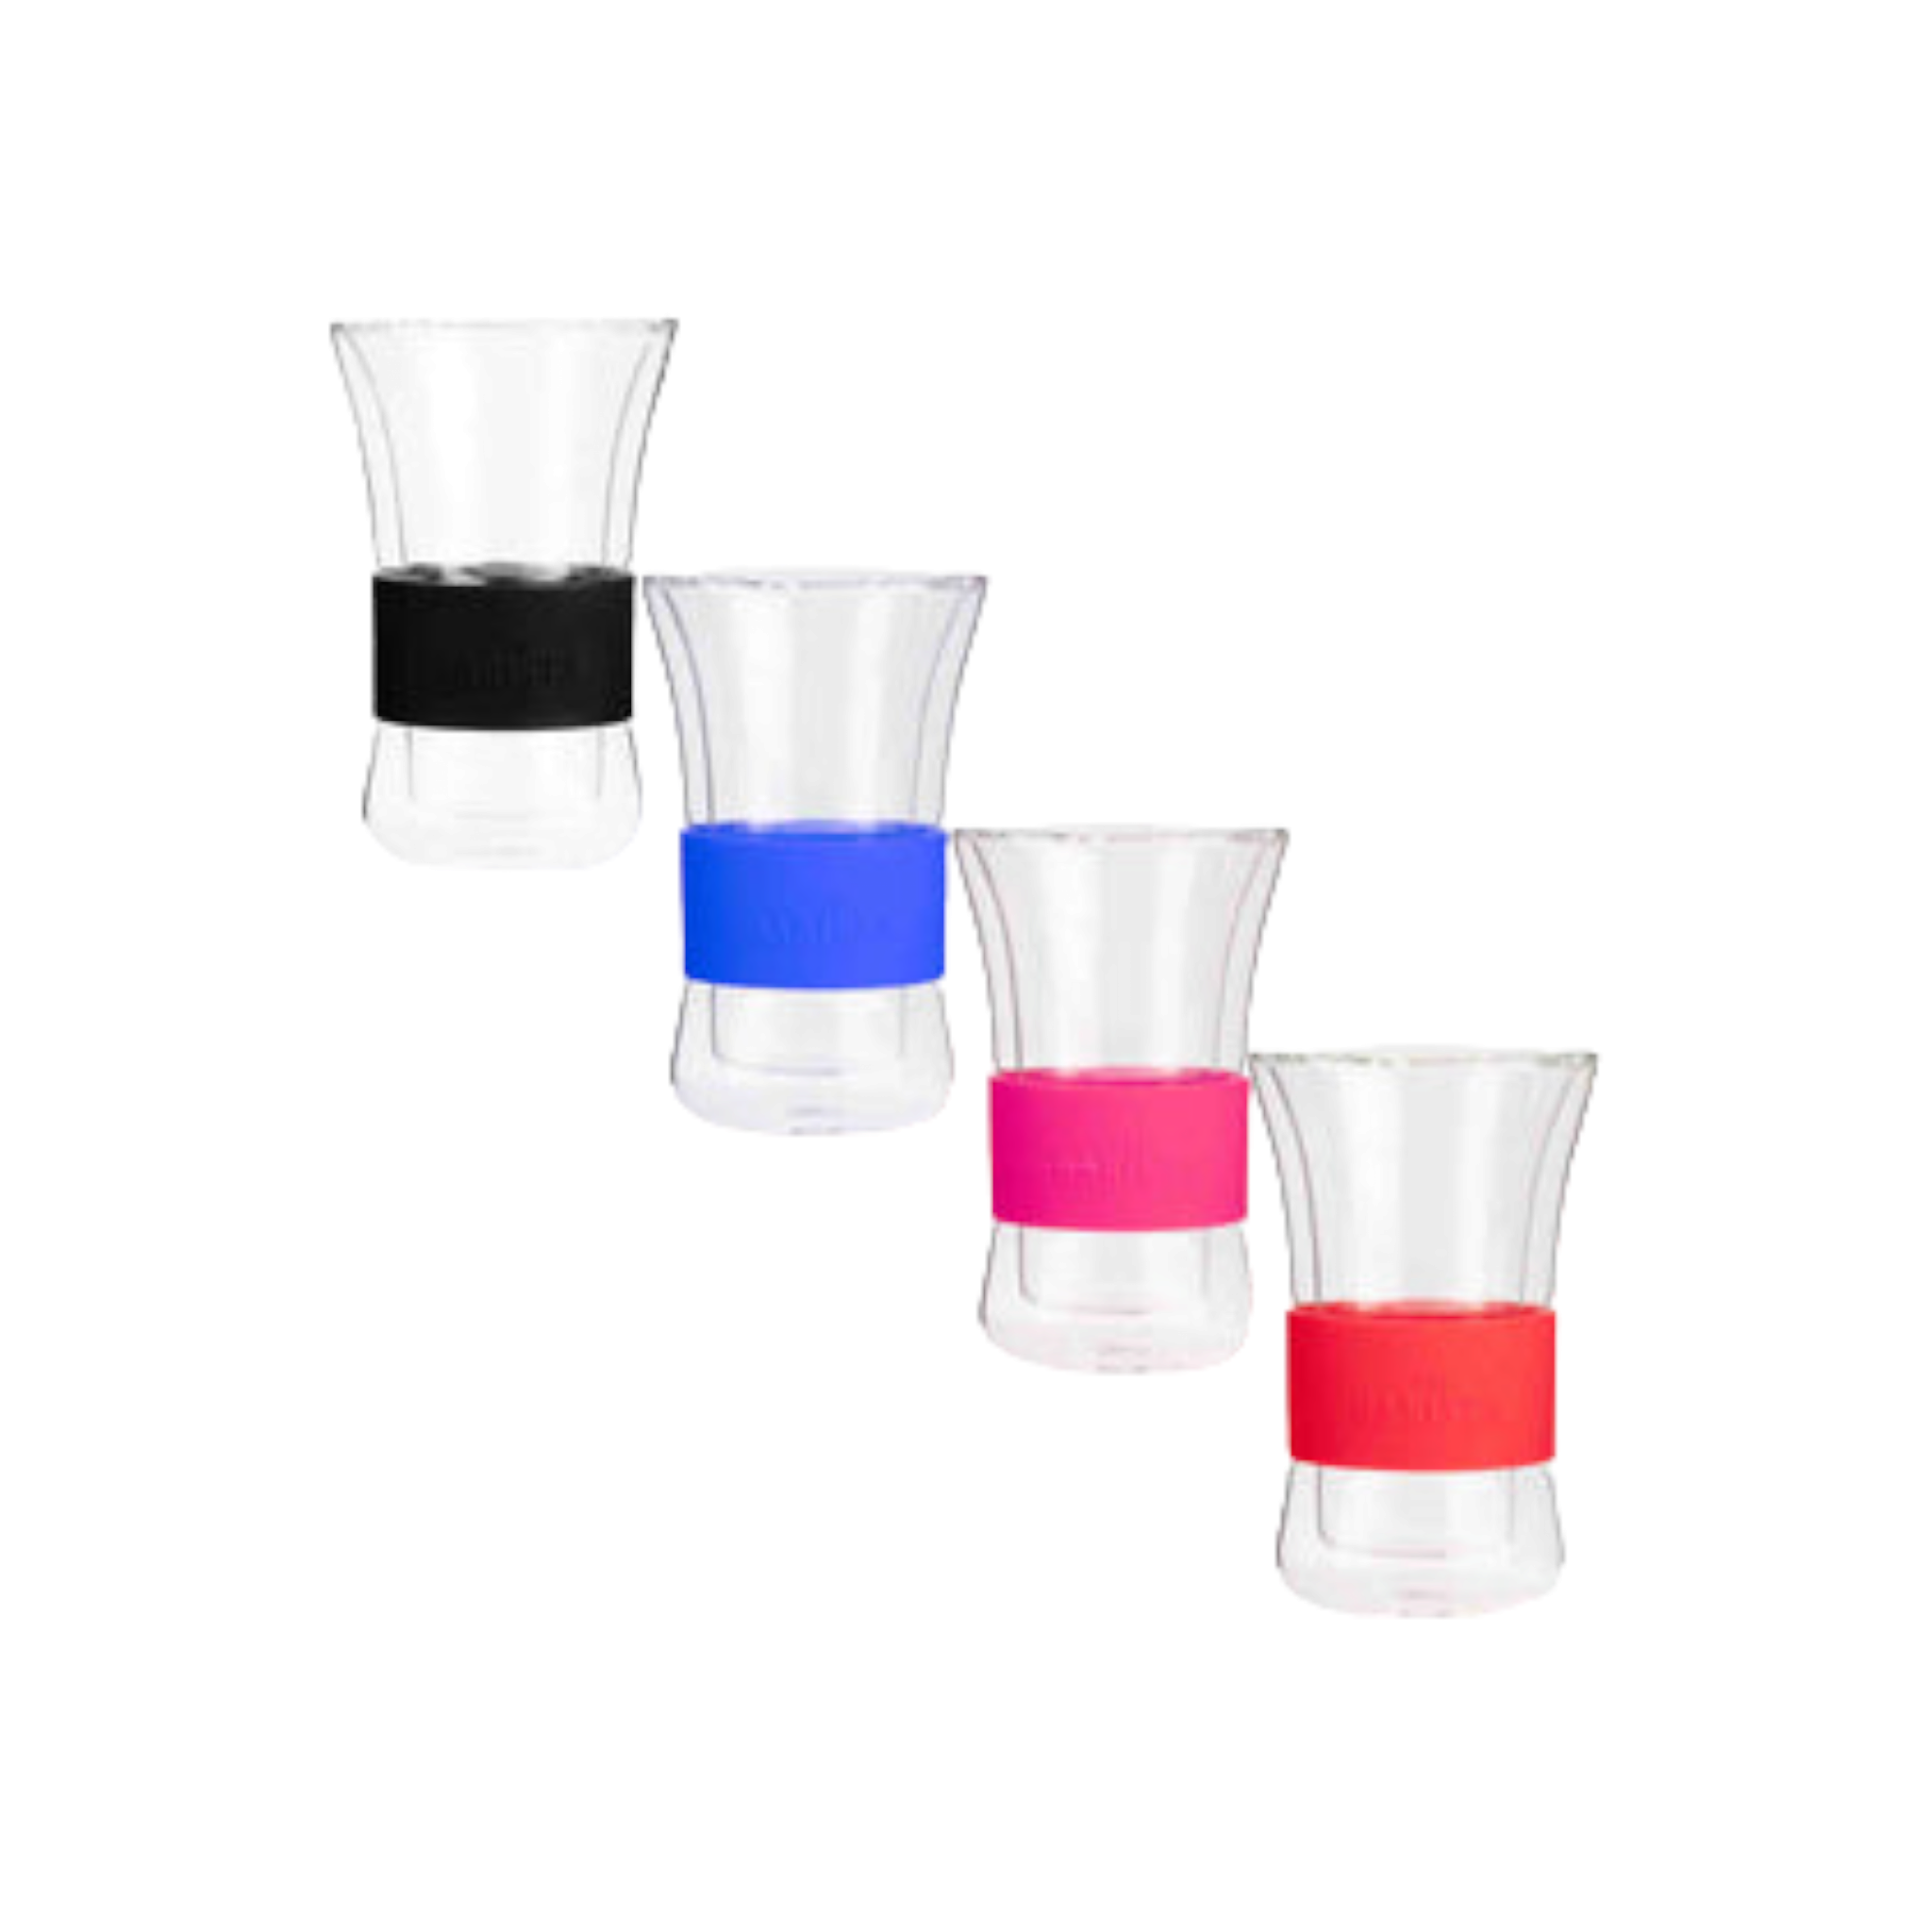 Barista Double Wall Café Cup 250ml with Color Silicone Grip 4pcs 11850A